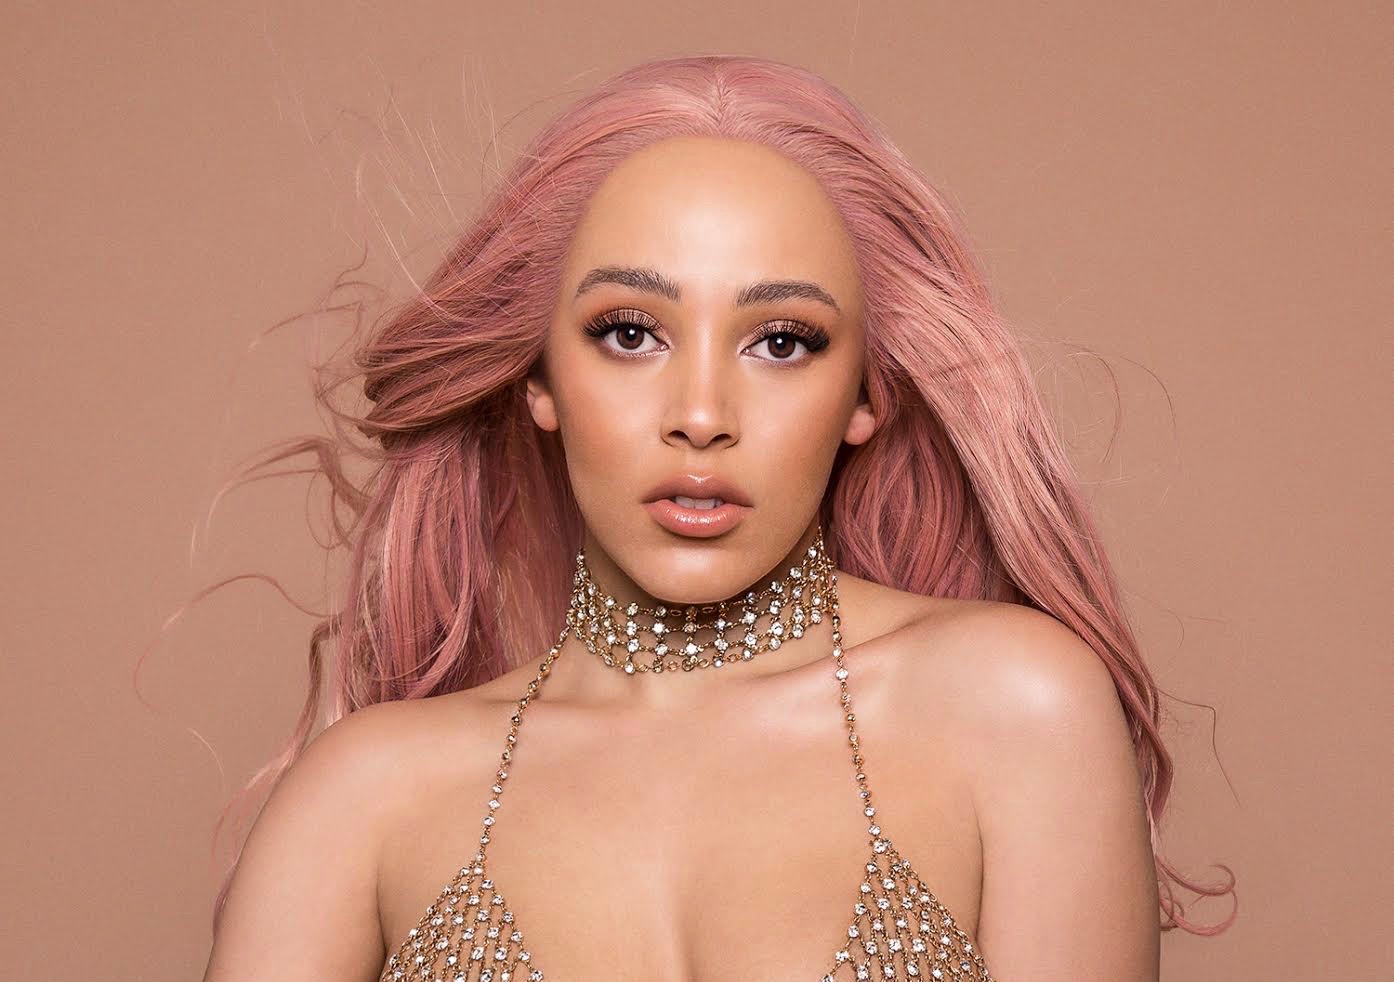 As of late 2020, Doja Cat has an estimated net worth of $4 million, resulti...